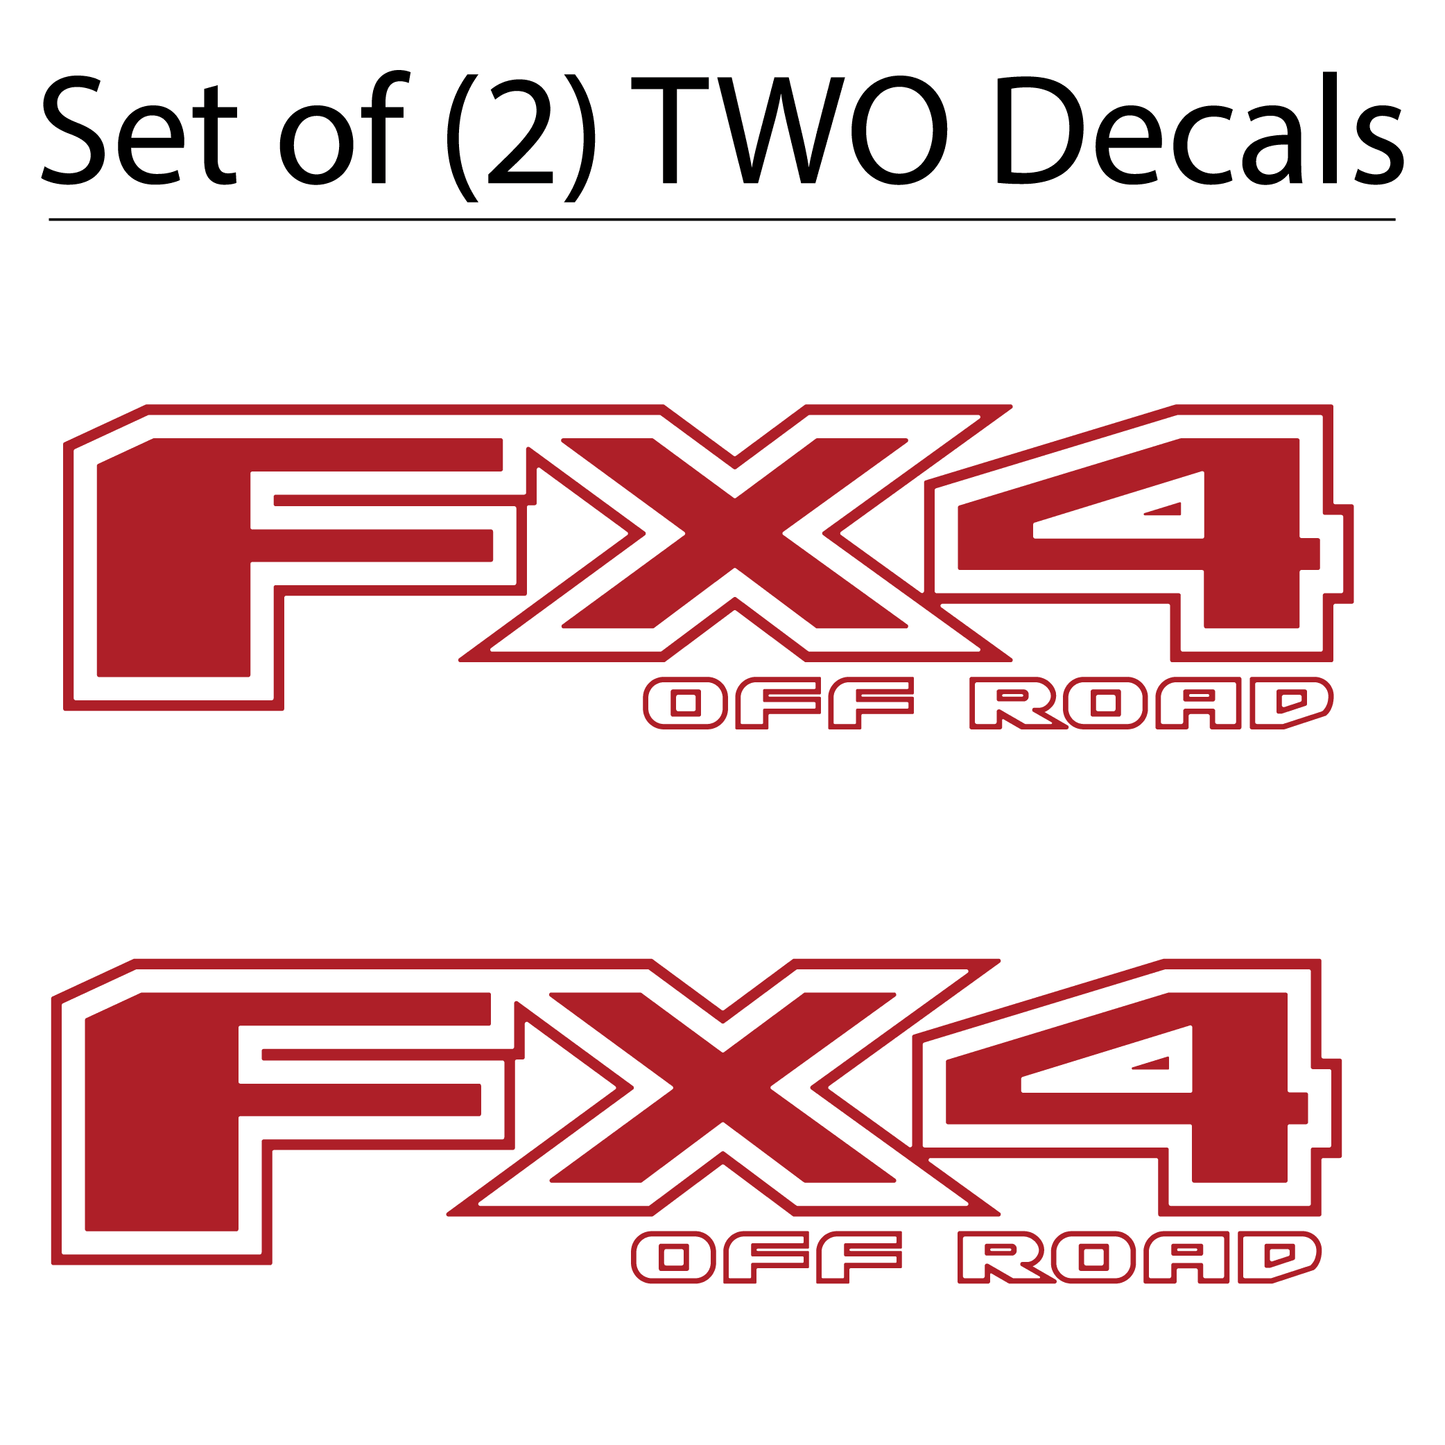 Shop Vinyl Design F-150 F-250 FX4 Off Road Replacement Bedside Decals Vehicle Vinyl Graphic Decal Red Gloss Shop Vinyl Design decals stickers